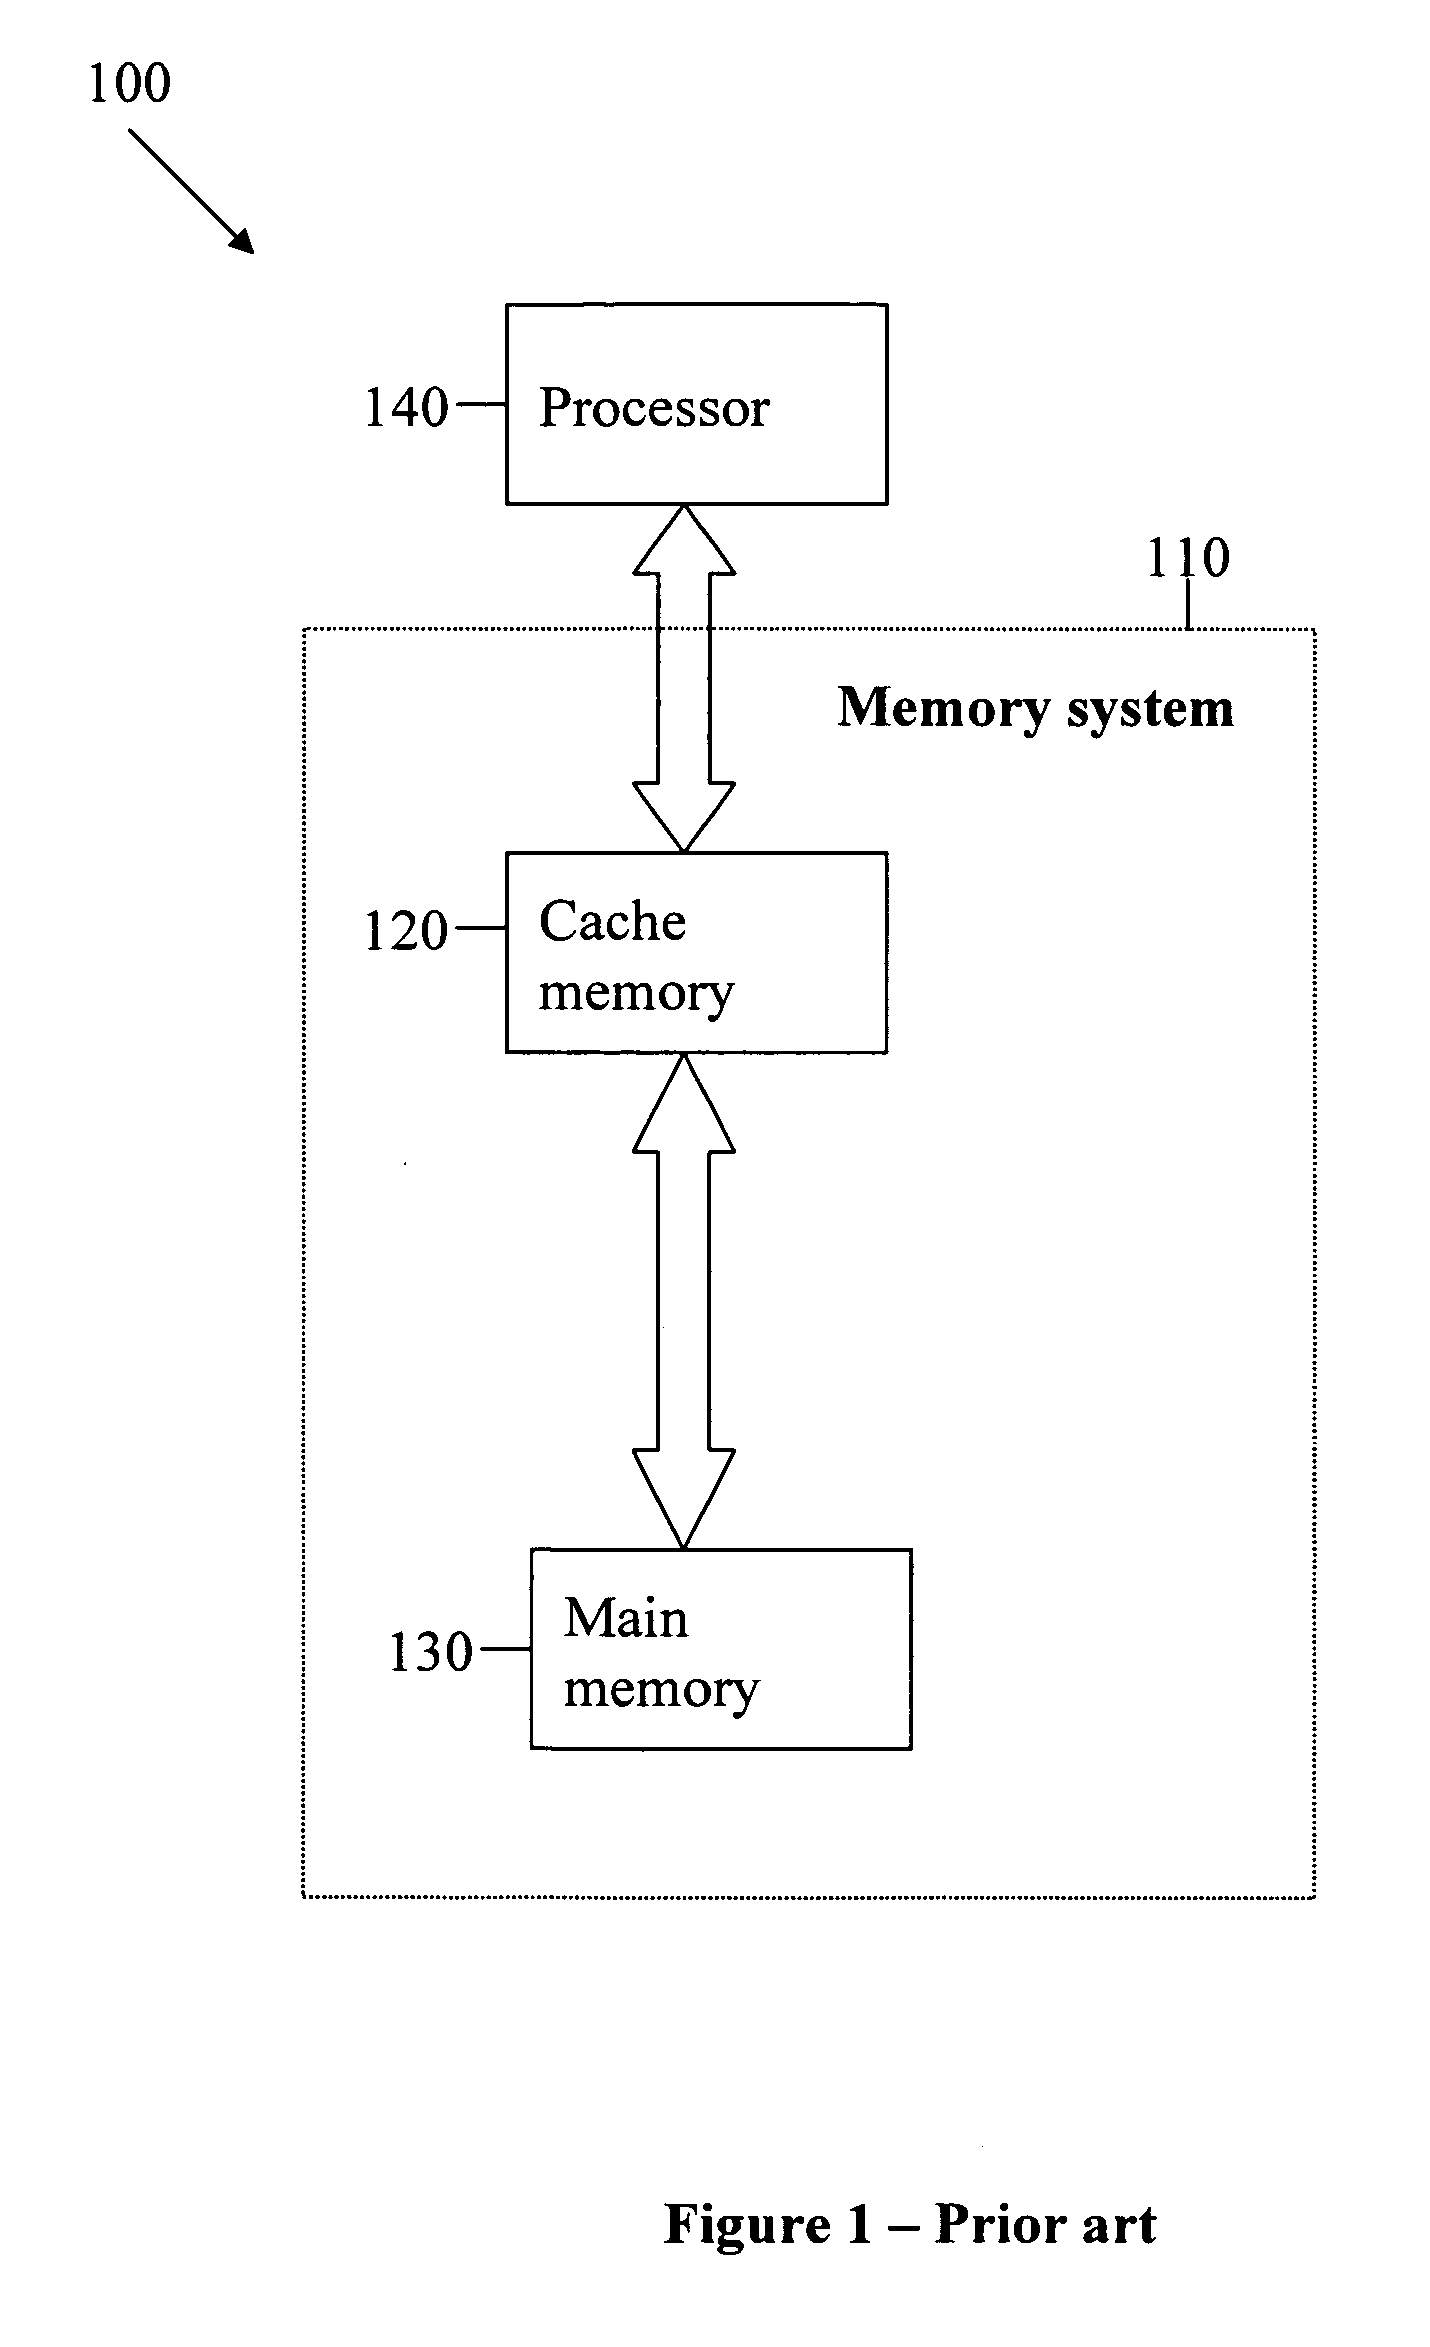 Conditionally accessible cache memory